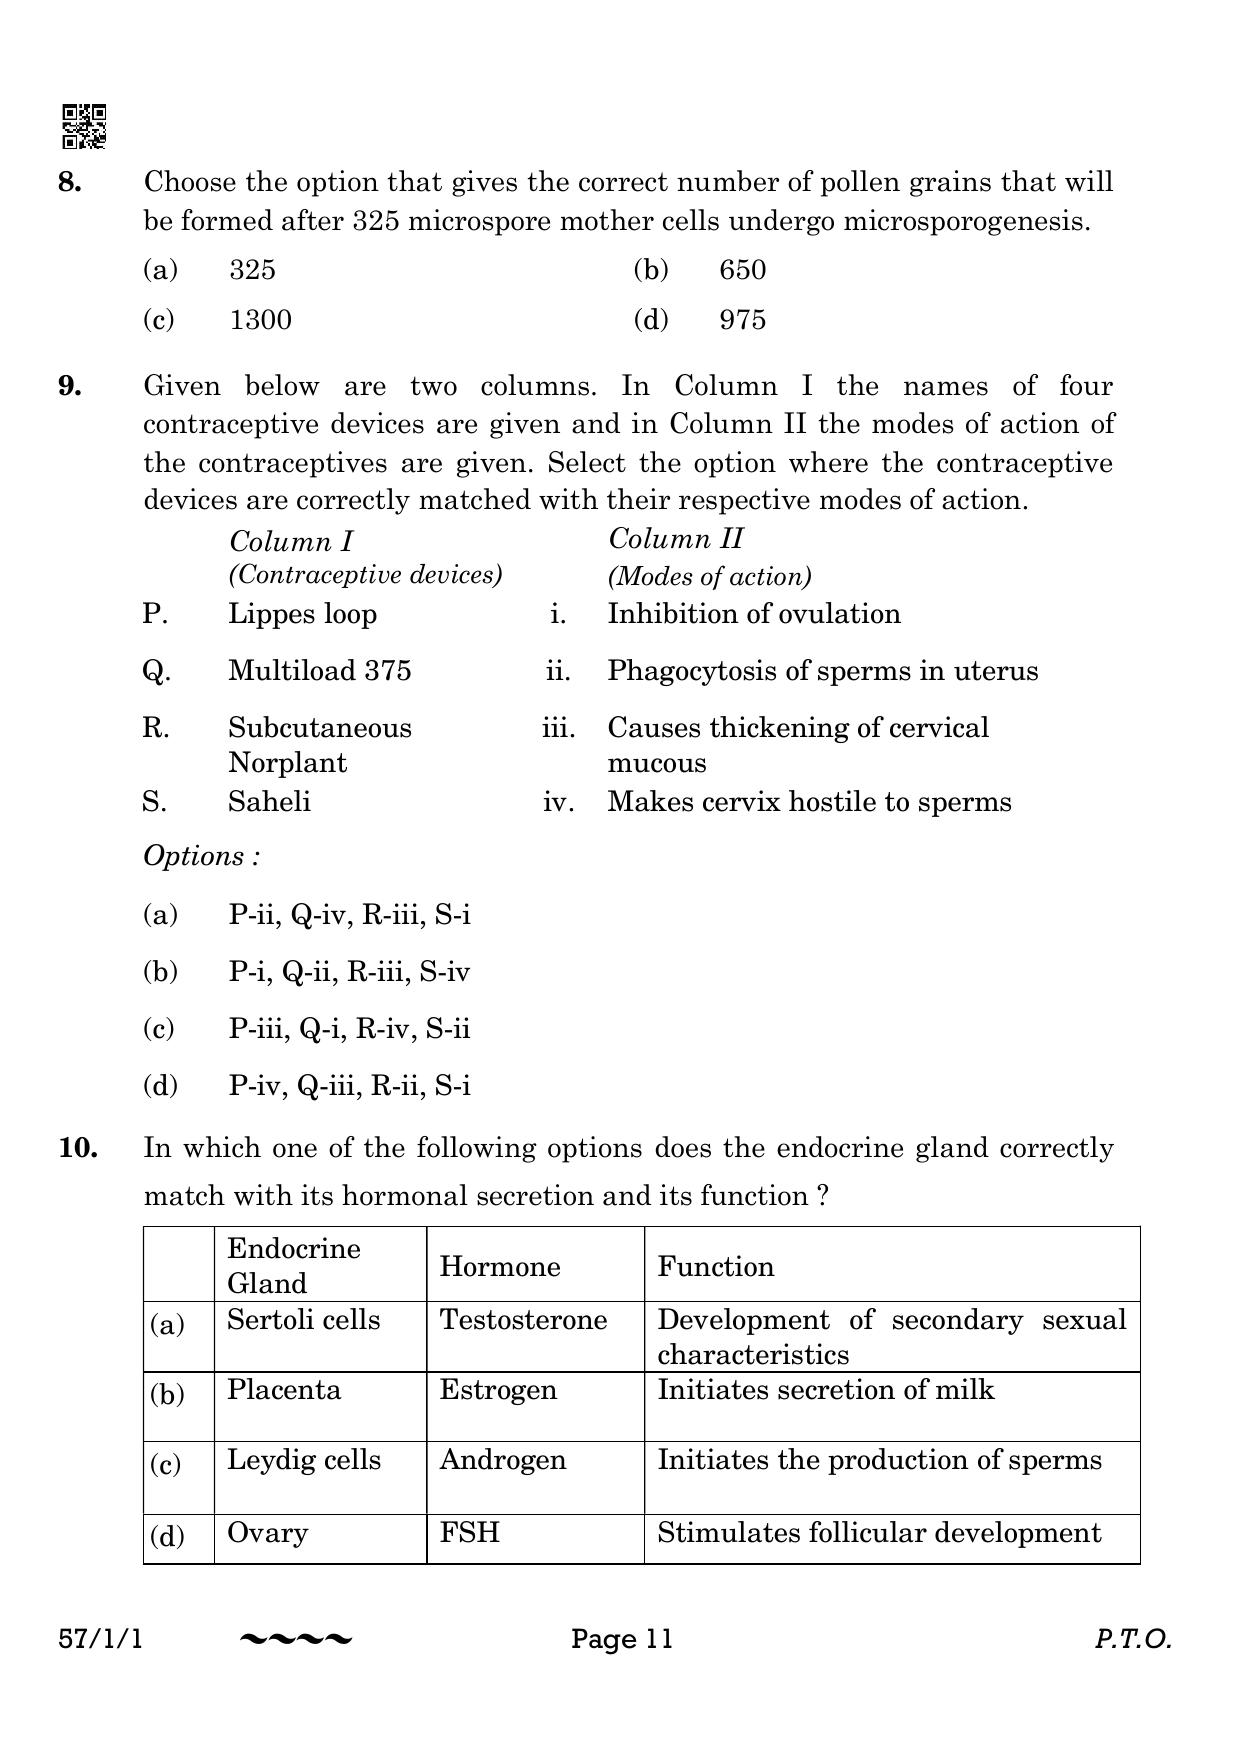 CBSE Class 12 57-1-1 Biology 2023 Question Paper - Page 11